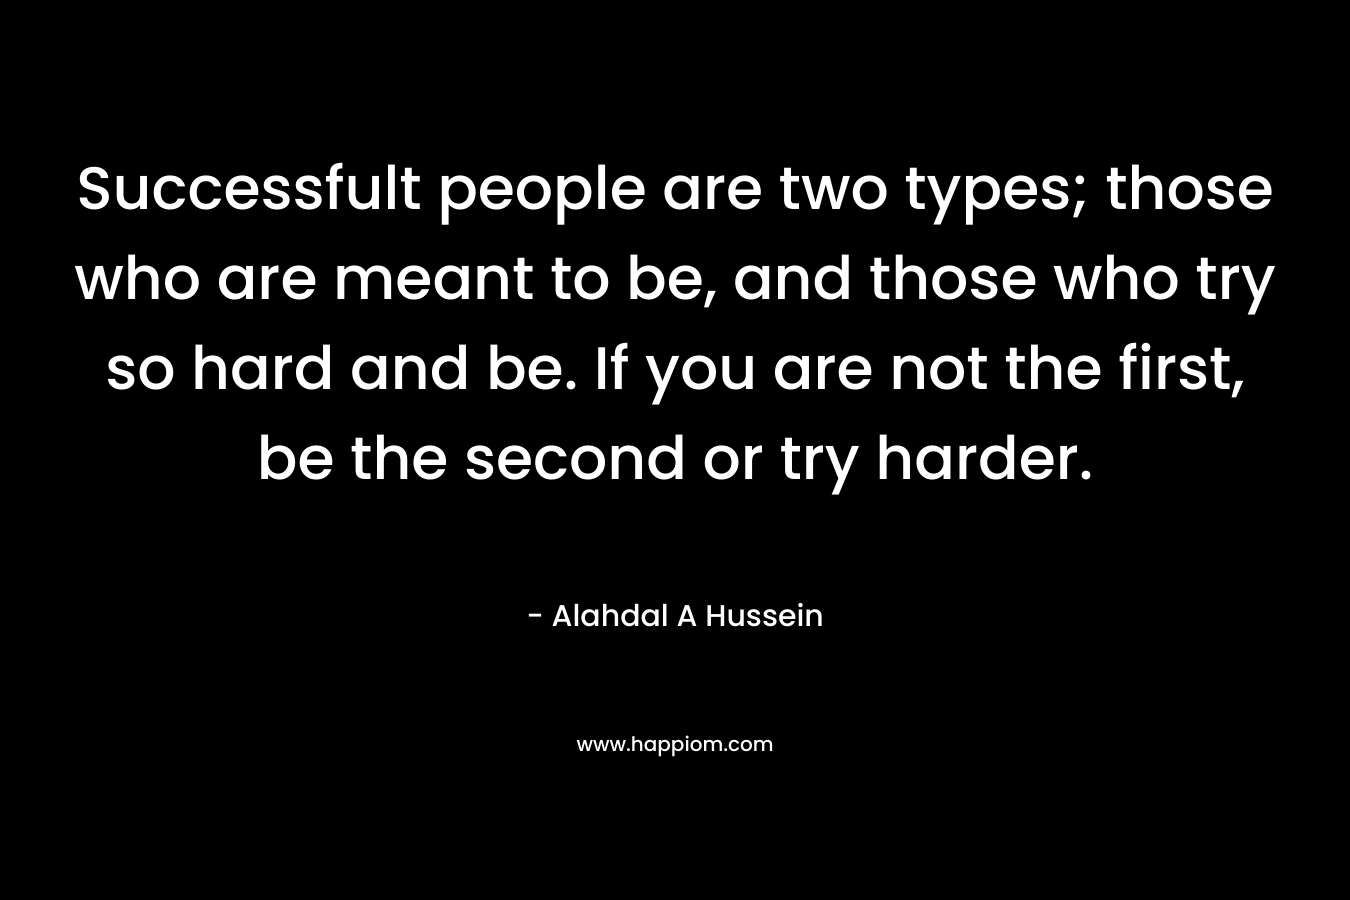 Successfult people are two types; those who are meant to be, and those who try so hard and be. If you are not the first, be the second or try harder.